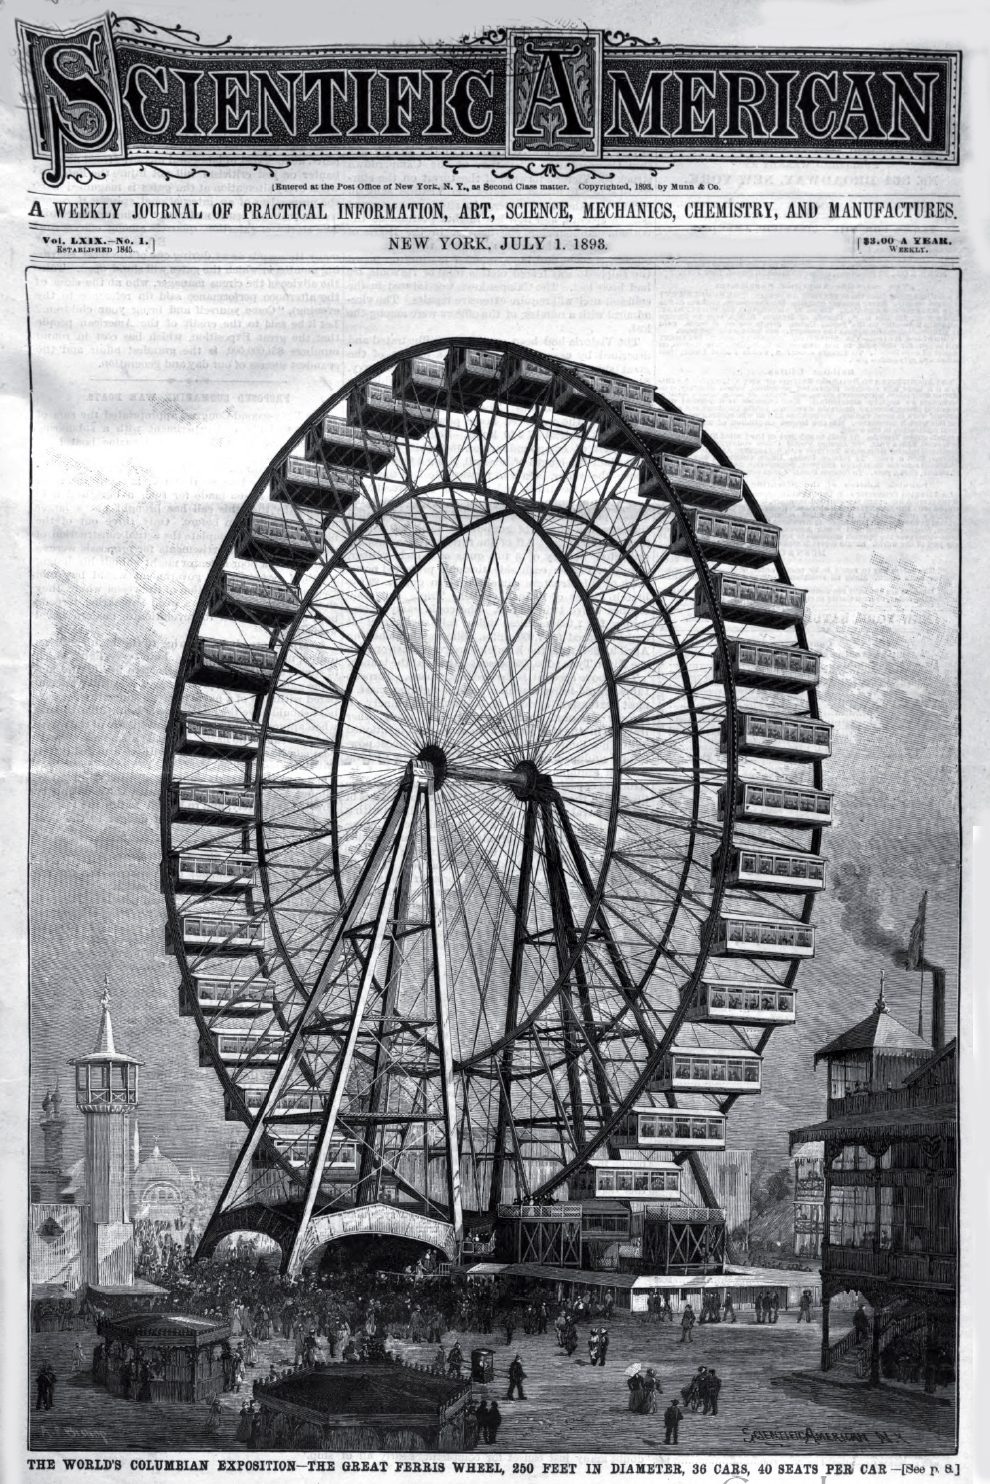 The Ferris Wheel at the 1893 Columbian Exhibition in Chicago.